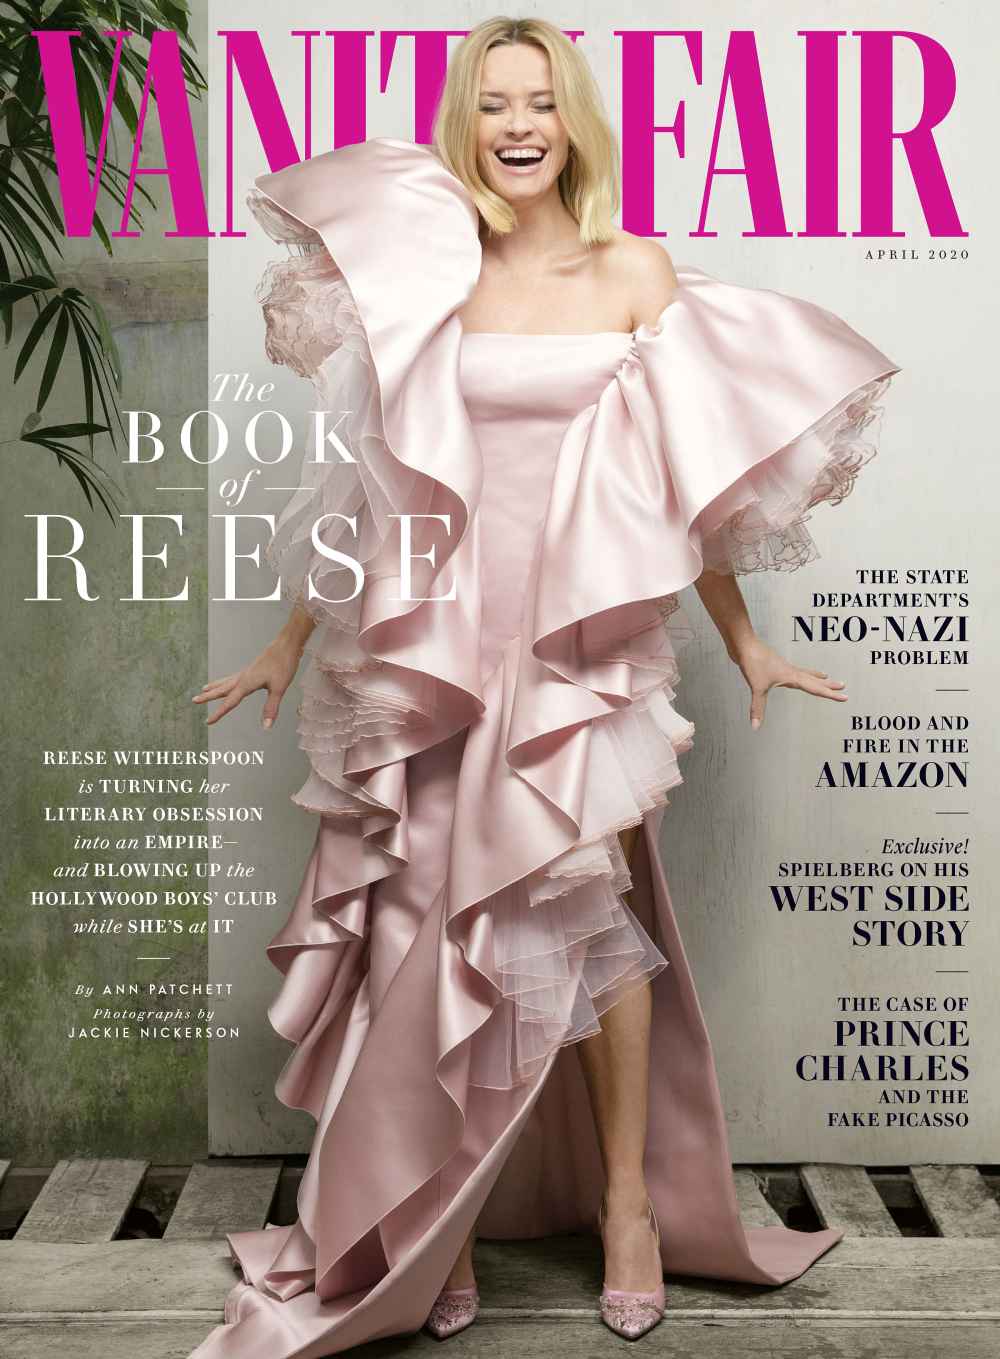 Reese Witherspoon Opens About Being Assaulted and Harassed in Vanity Fair